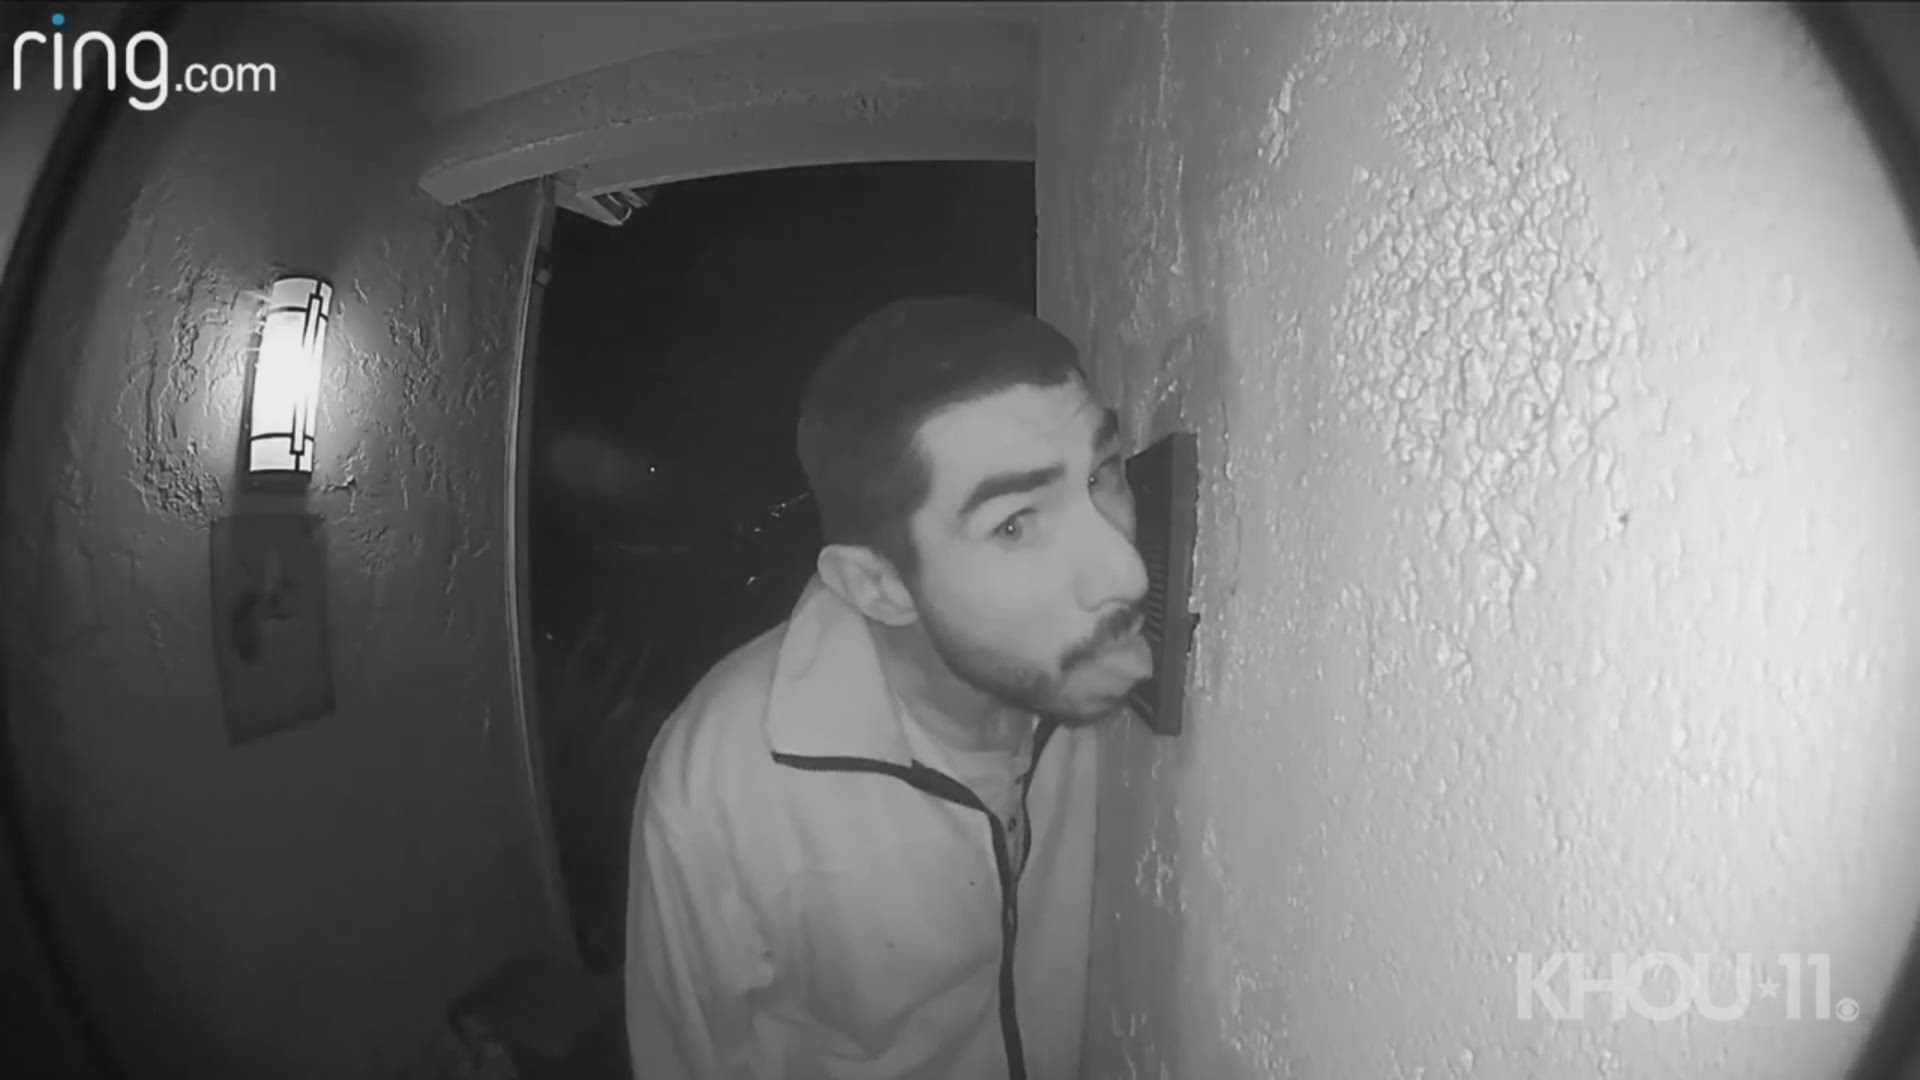 A man was caught on surveillance video licking a doorbell in the Rossi Rico neighborhood of Salinas, Calif.